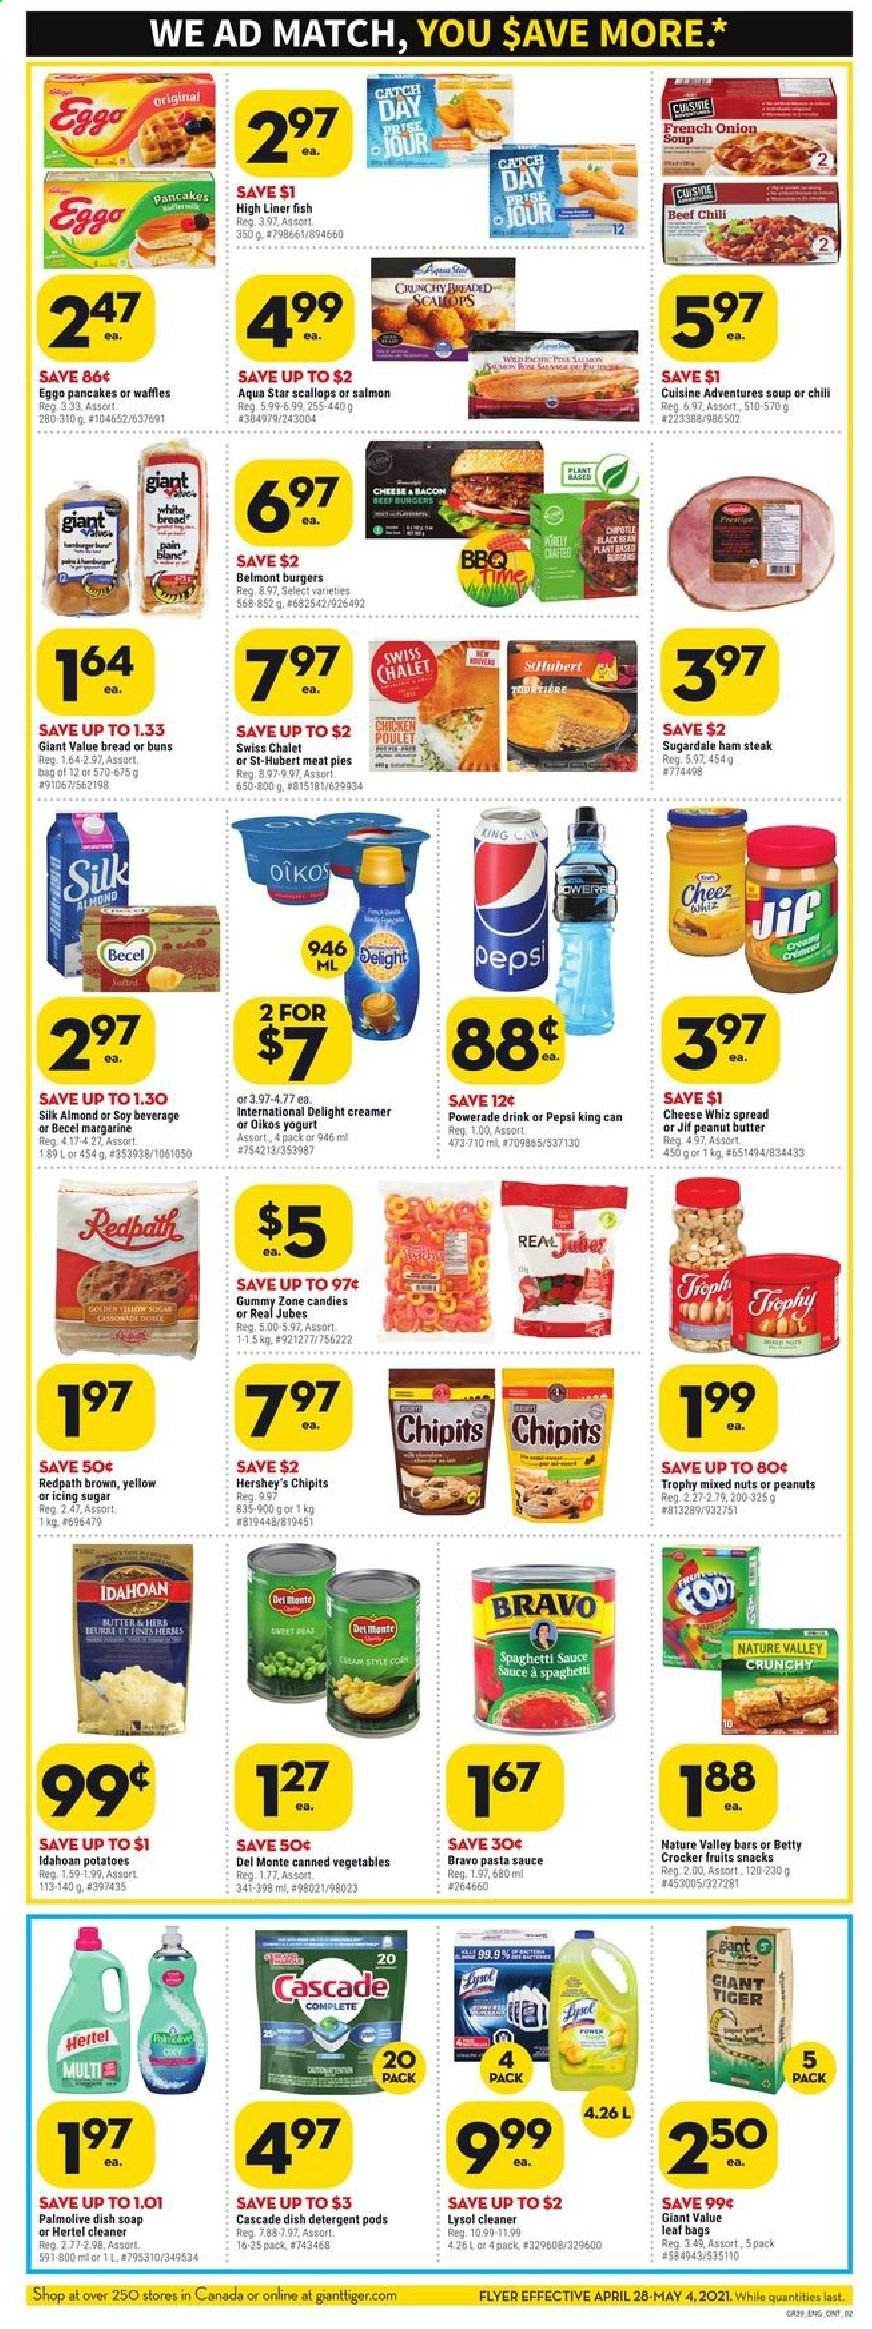 thumbnail - Giant Tiger Flyer - April 28, 2021 - May 04, 2021 - Sales products - bread, white bread, buns, waffles, scallops, fish, spaghetti, pasta sauce, soup, hamburger, sauce, spaghetti sauce, Sugardale, bacon, ham, ham steaks, cheese, yoghurt, Oikos, margarine, creamer, Hershey's, snack, sugar, icing sugar, canned vegetables, Nature Valley, peanut butter, Jif, peanuts, mixed nuts, Powerade, Pepsi, L'Or, cleaner, Lysol, Cascade, Palmolive, soap, Lack, trophy cup, steak. Page 2.